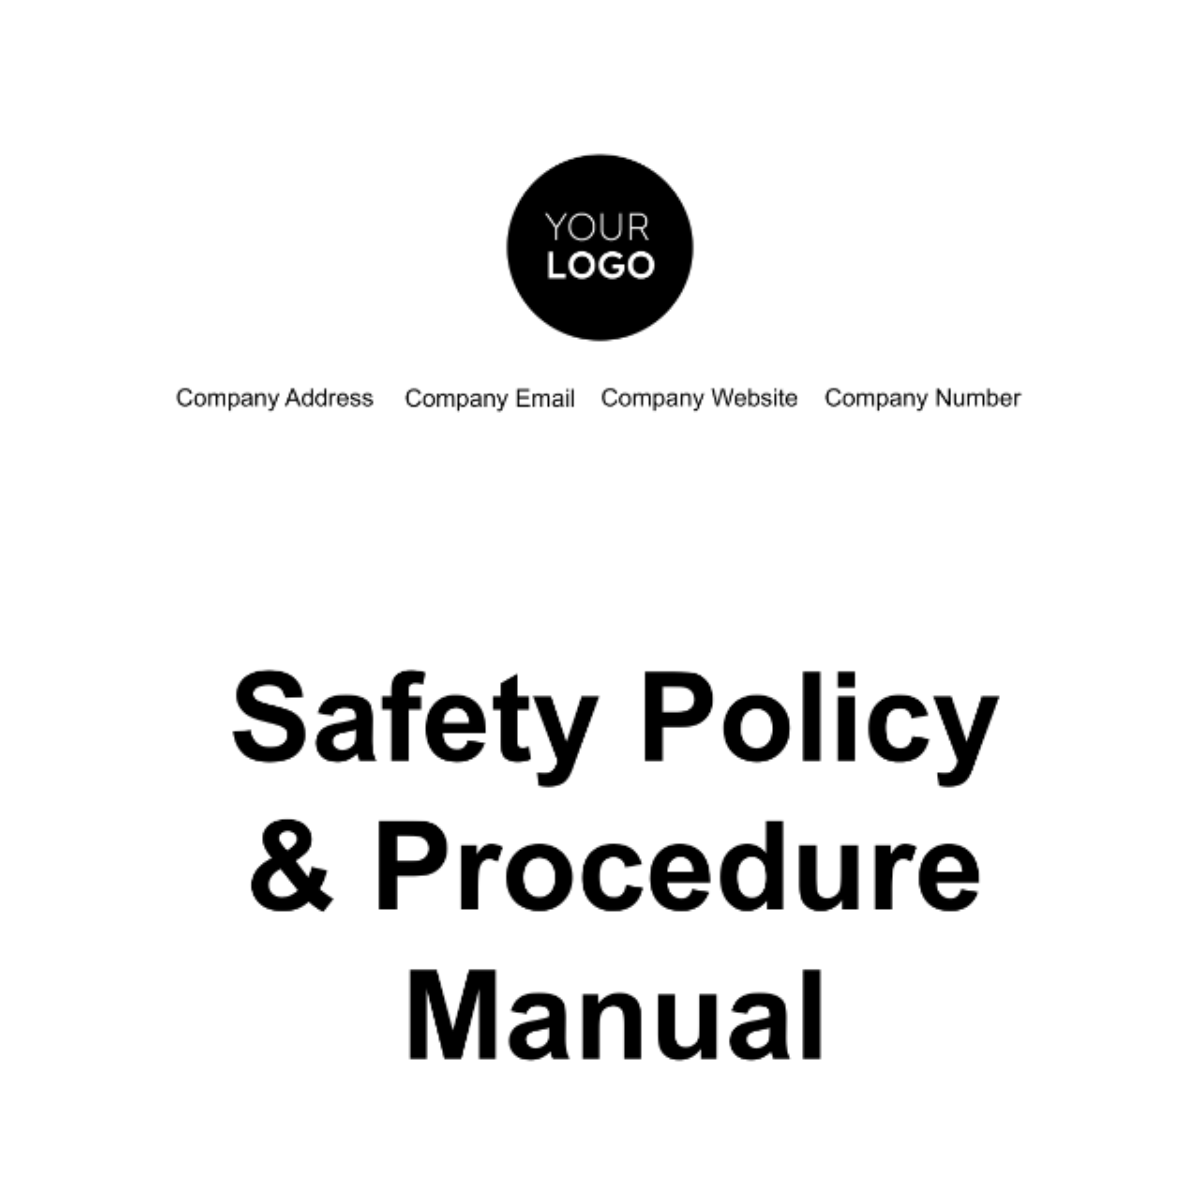 Free Safety Policy & Procedure Manual Template